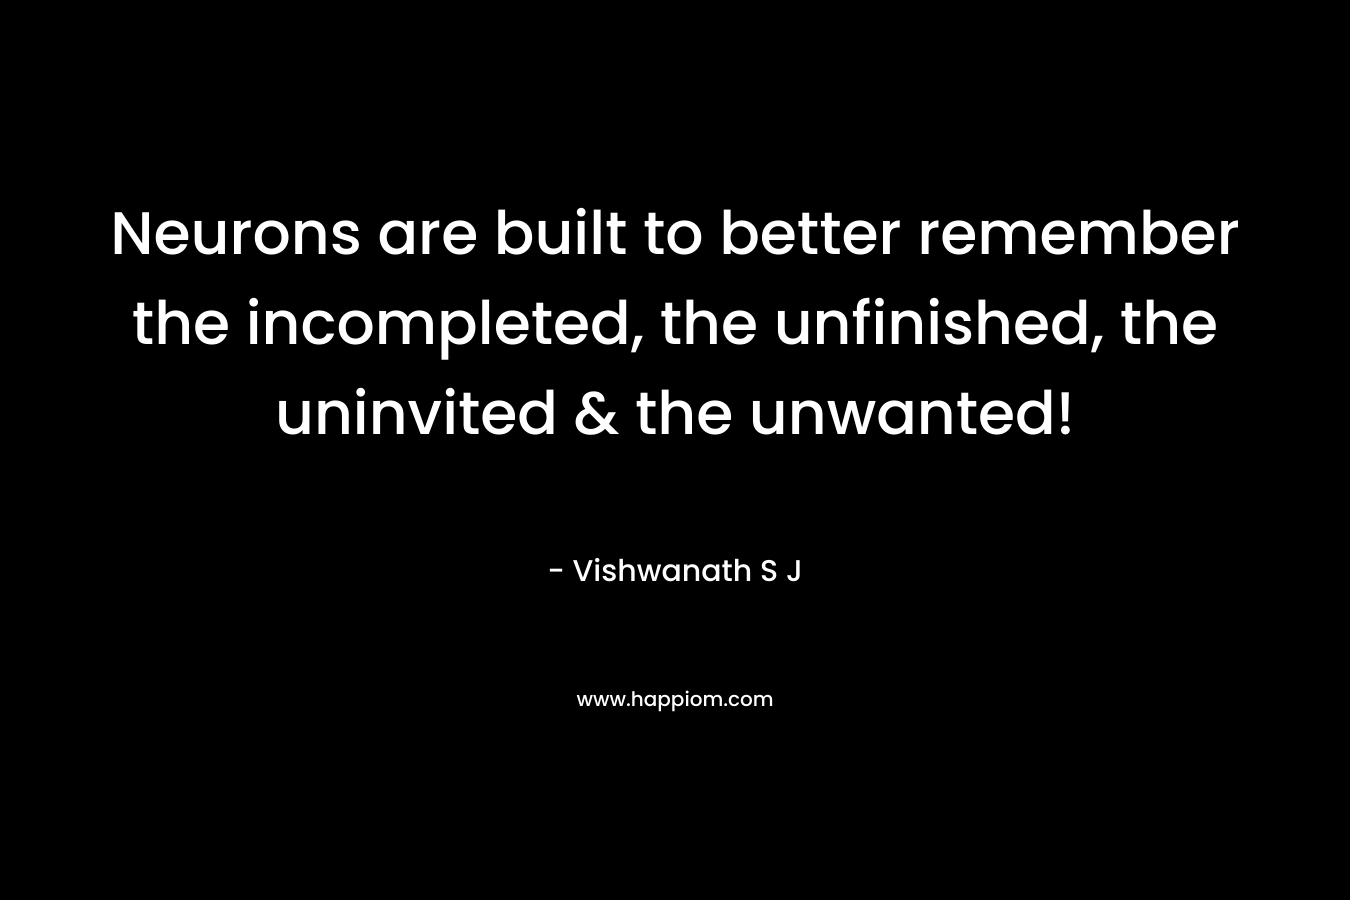 Neurons are built to better remember the incompleted, the unfinished, the uninvited & the unwanted!